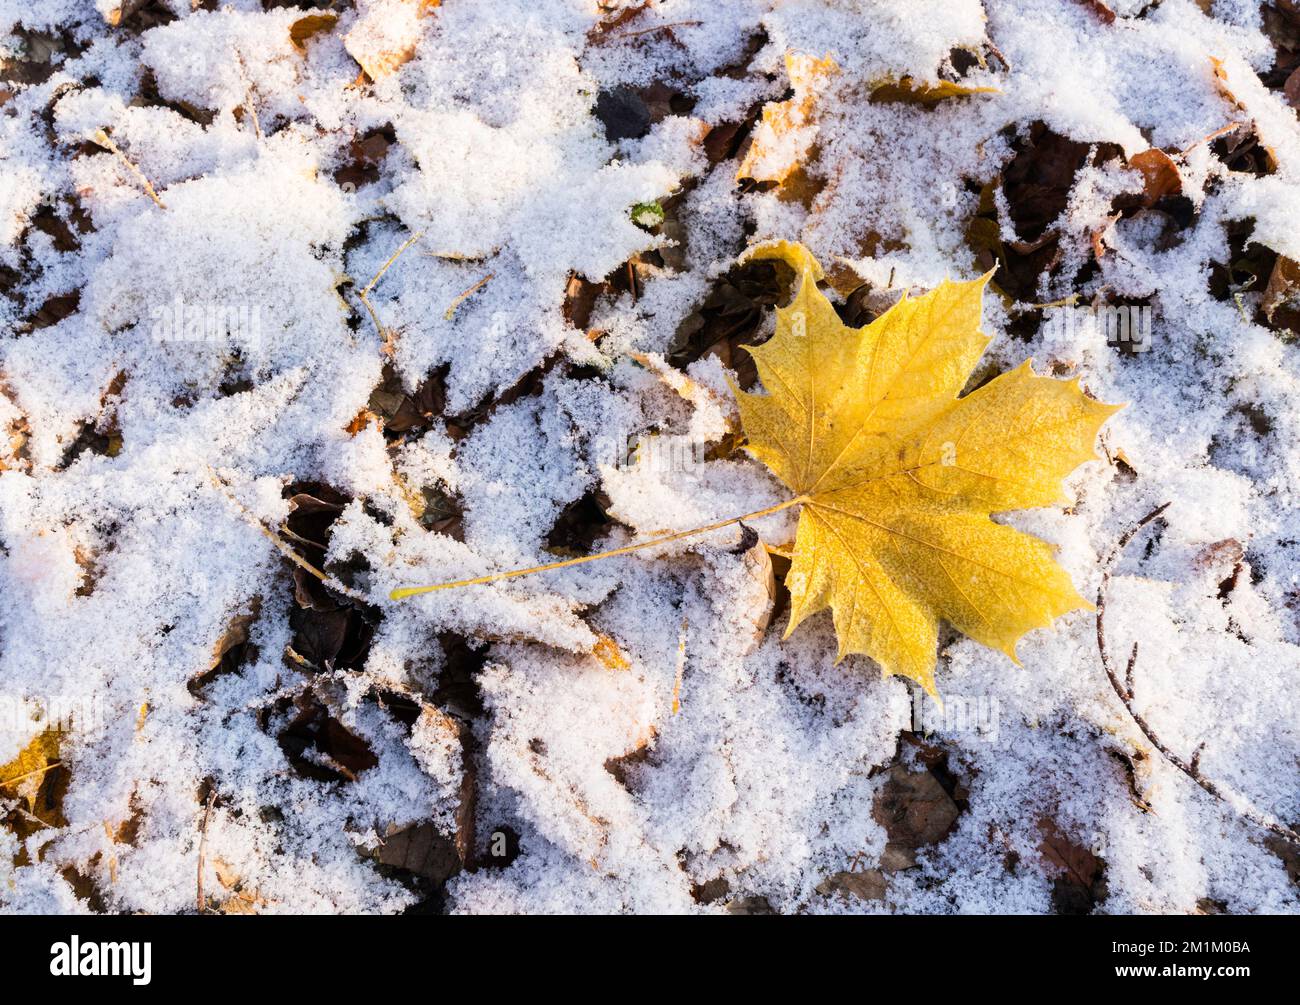 A fallen yellow maple leaf lies on snow covered ground Stock Photo